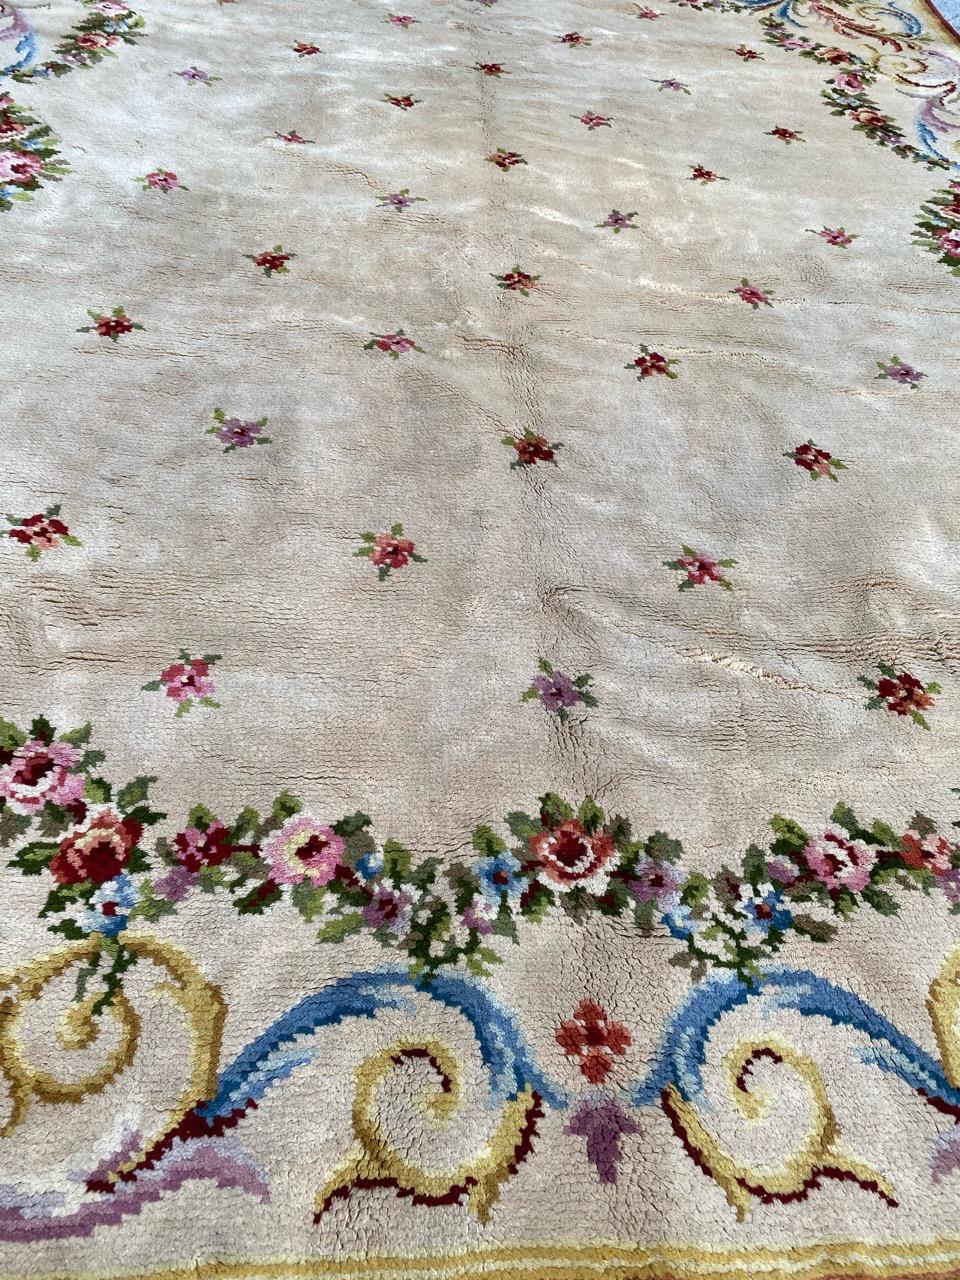 Exquisite Early 20th Century French Rug

Discover the elegance of a beautifully crafted early 20th-century French rug. This masterpiece features a delightful floral Aubusson and savonnerie design with a palette of soft, light colors. Every detail is